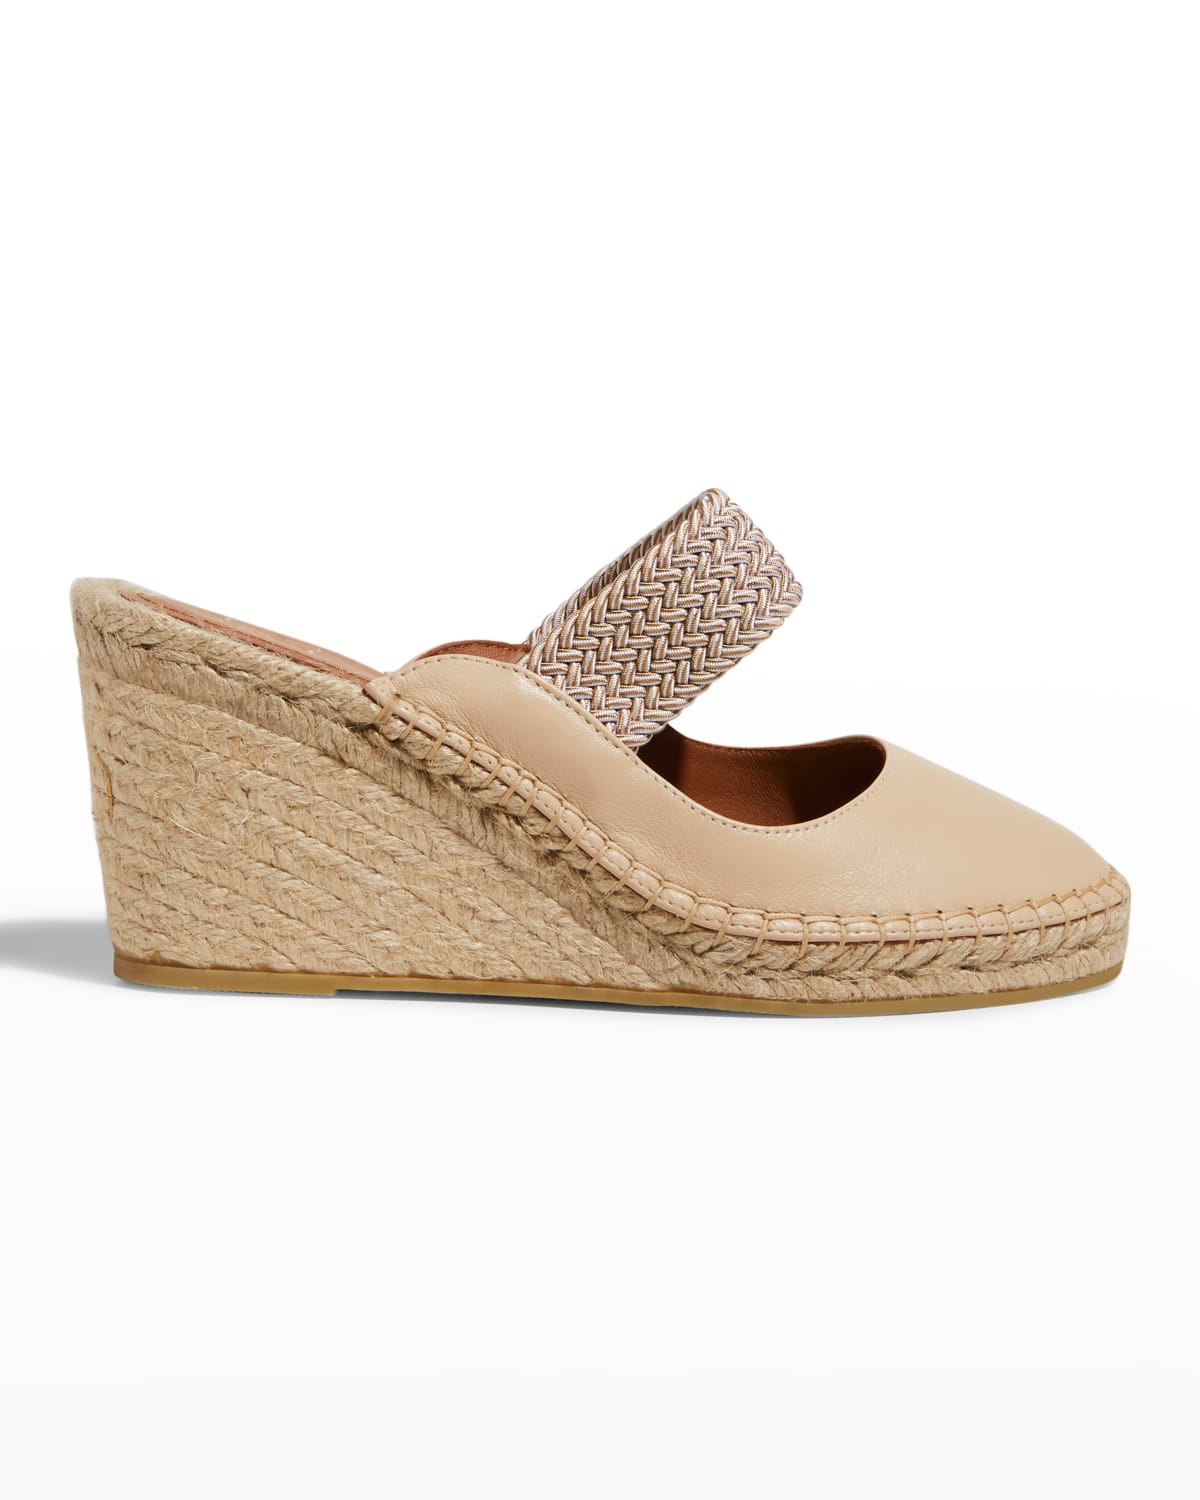 MALONE SOULIERS SIENA LEATHER WOVEN-BAND WEDGE ESPADRILLES